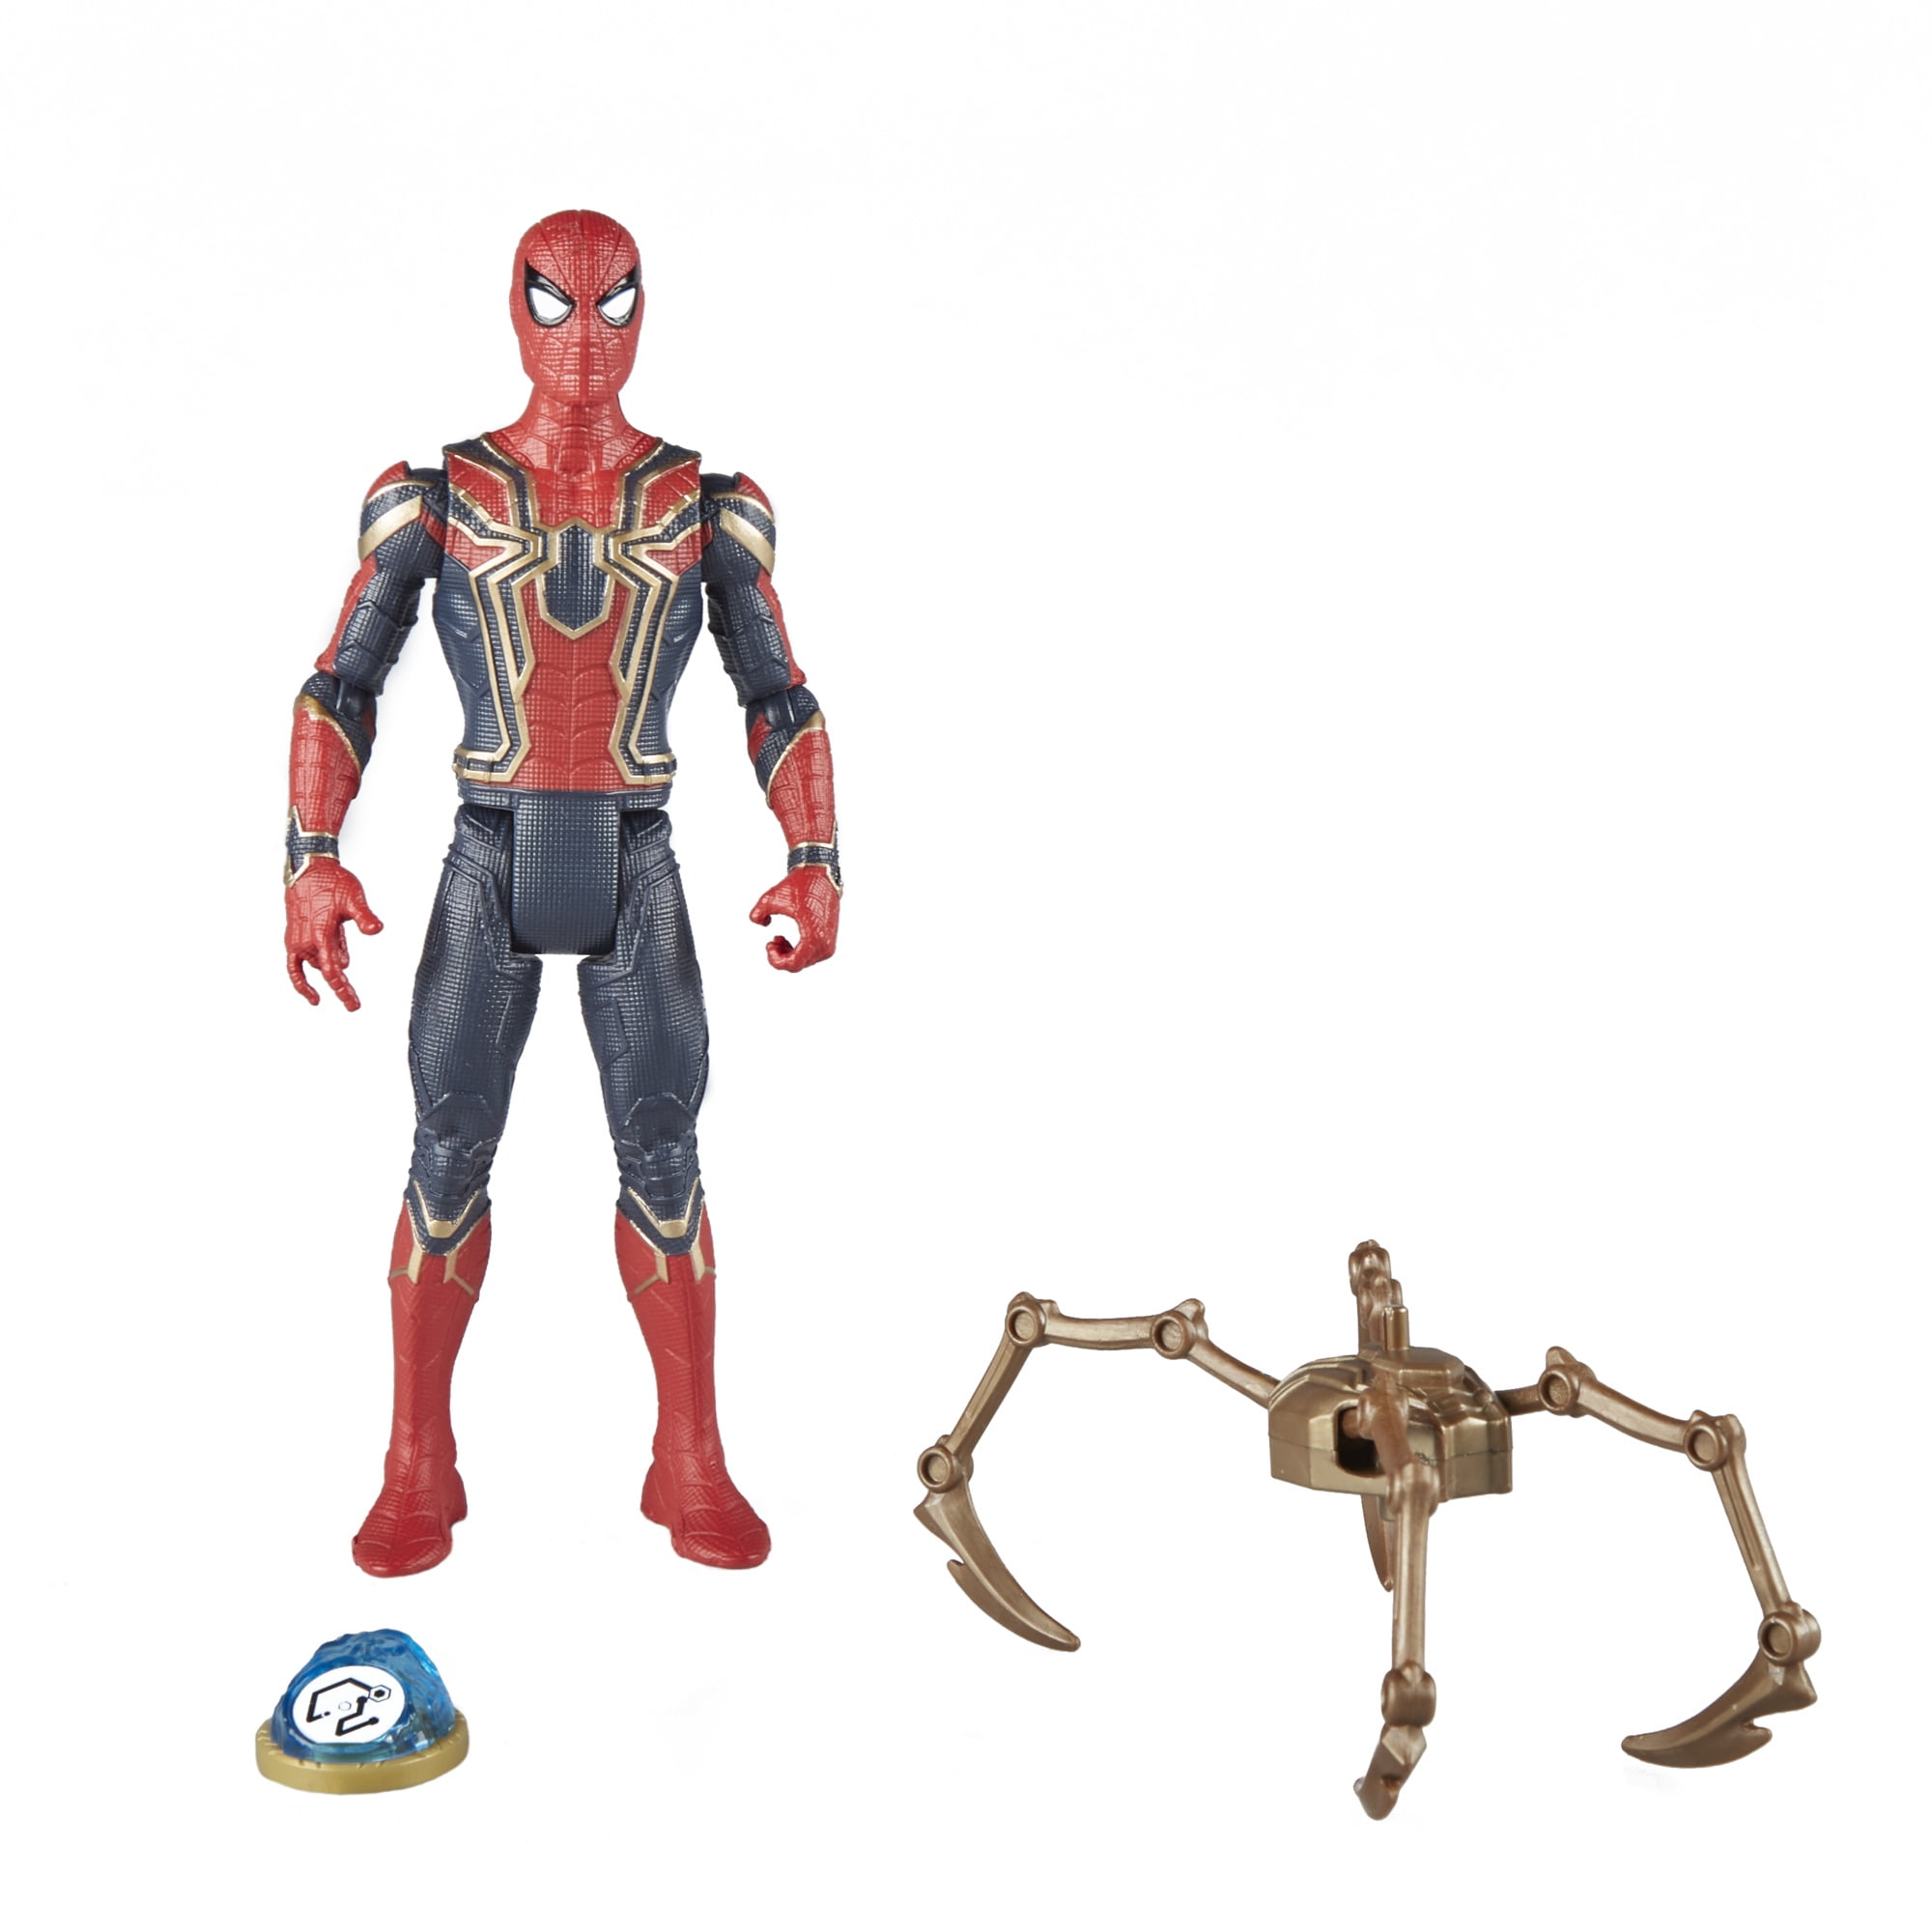 Avengers Infinity War Iron Spider Spiderman Statue Figure Collectible Toy 